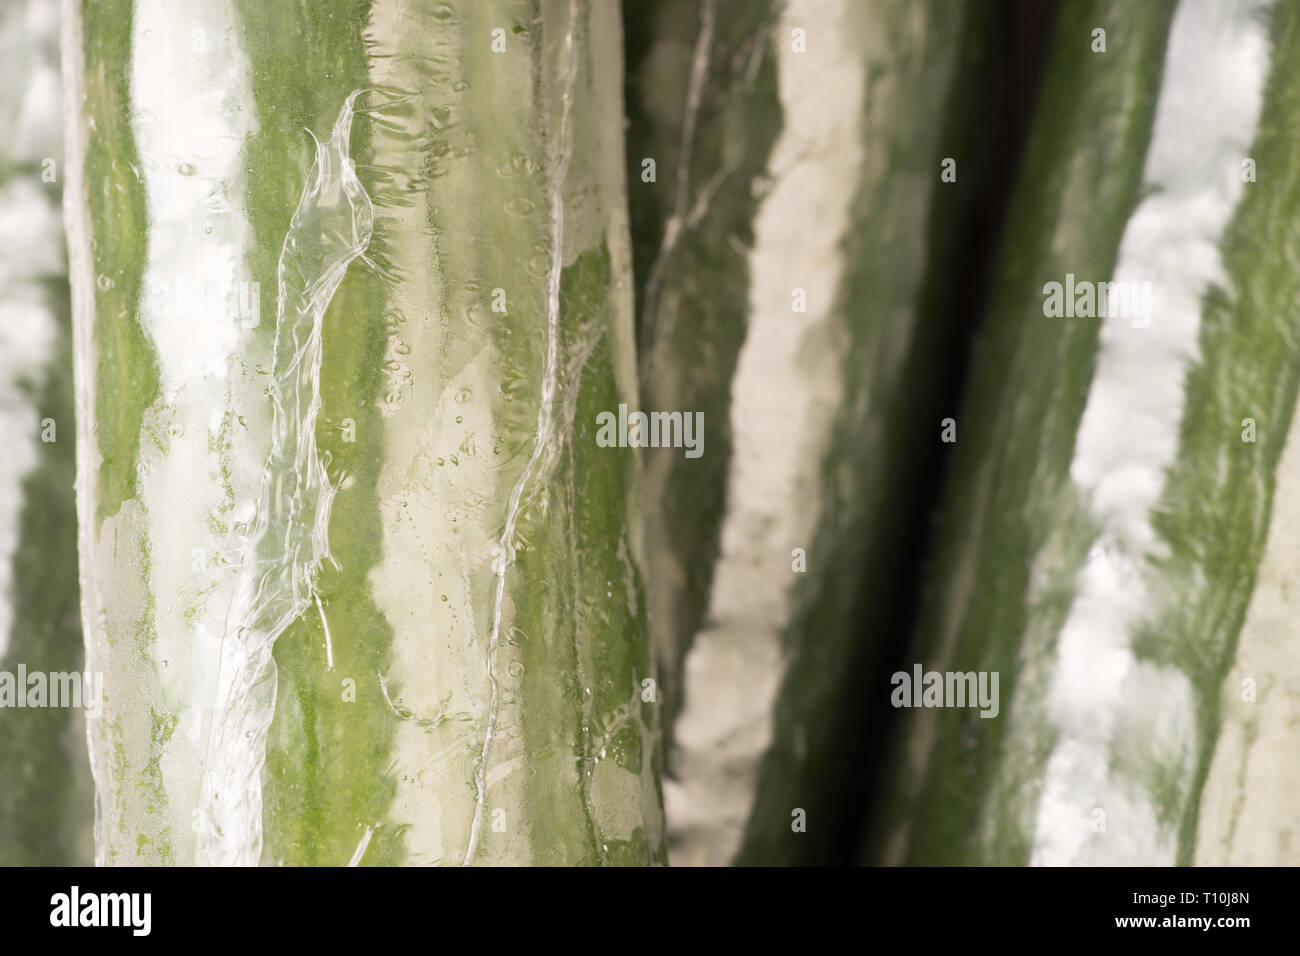 Bunch of cucumber wrapped in plastic films, close up and background Stock Photo